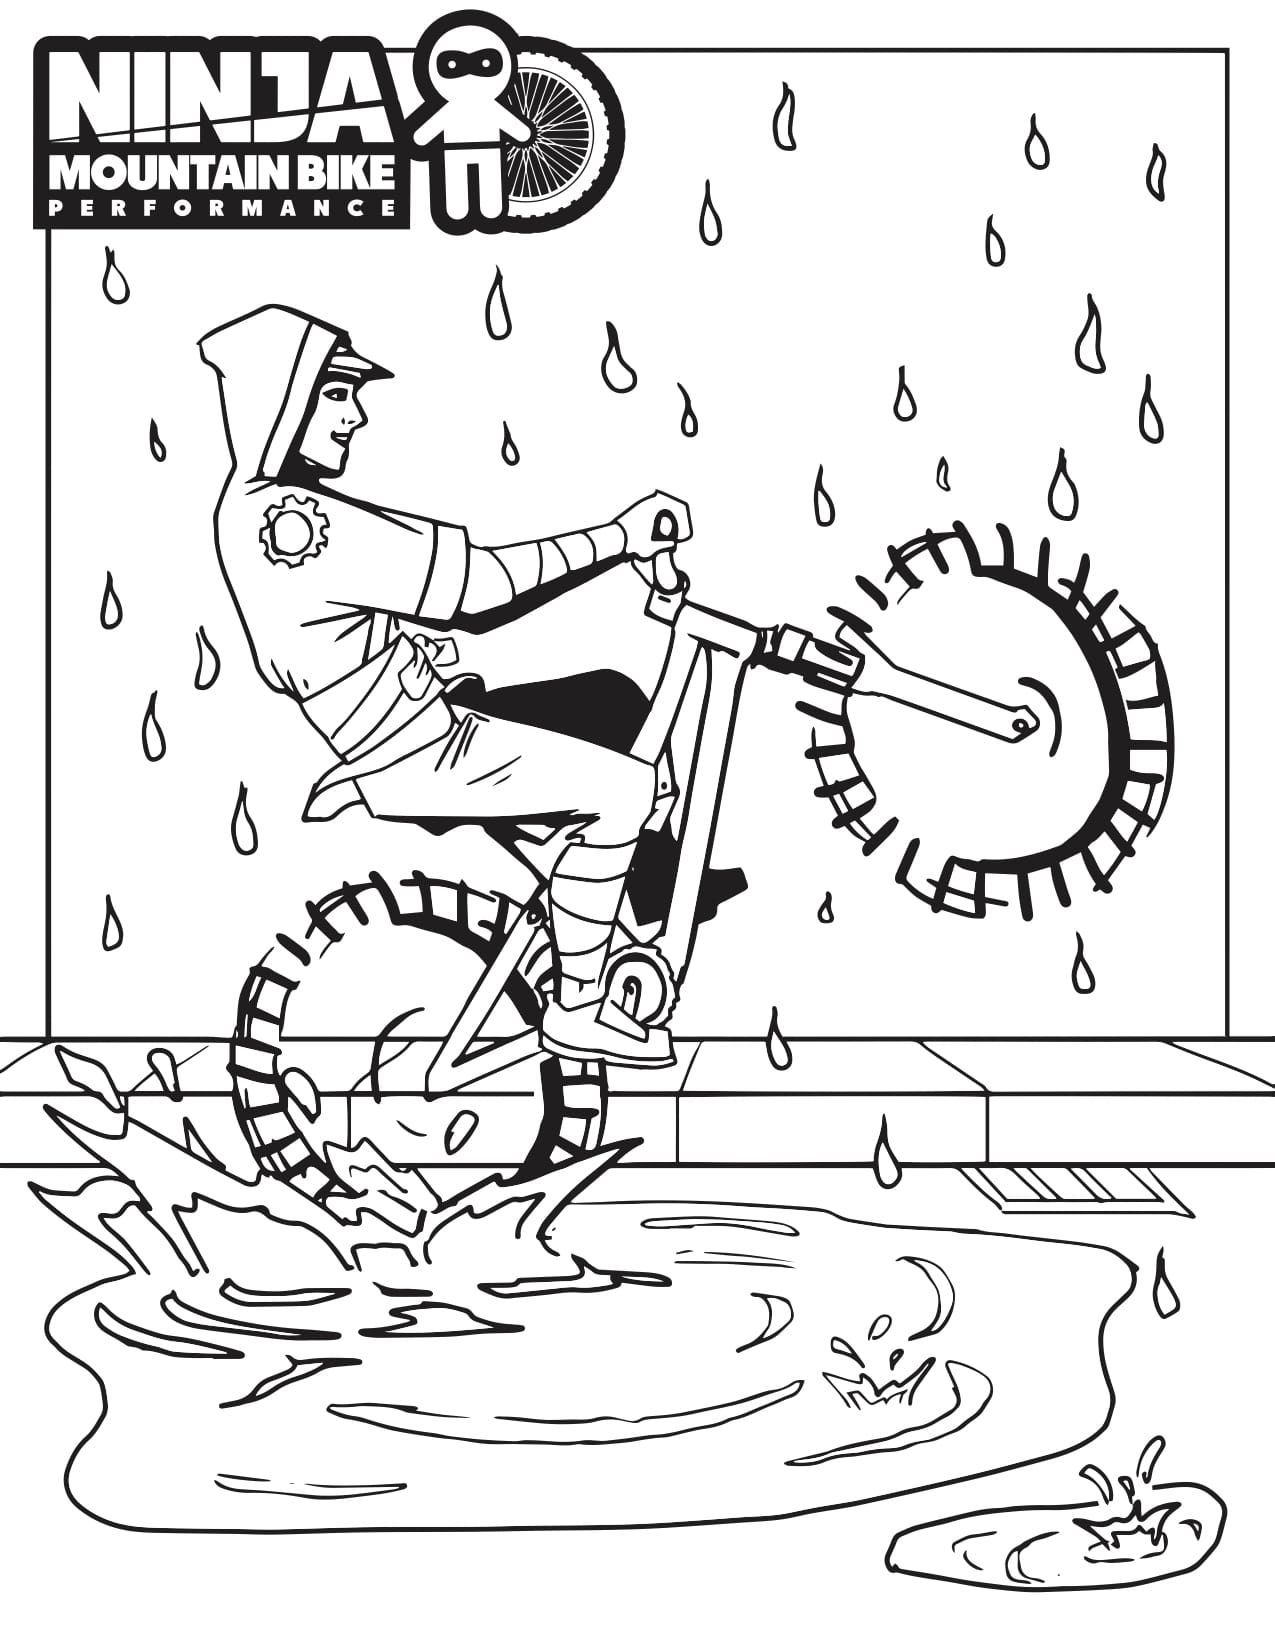 133 Dirt Bike Coloring Pages: Rev Up Your Creativity 29